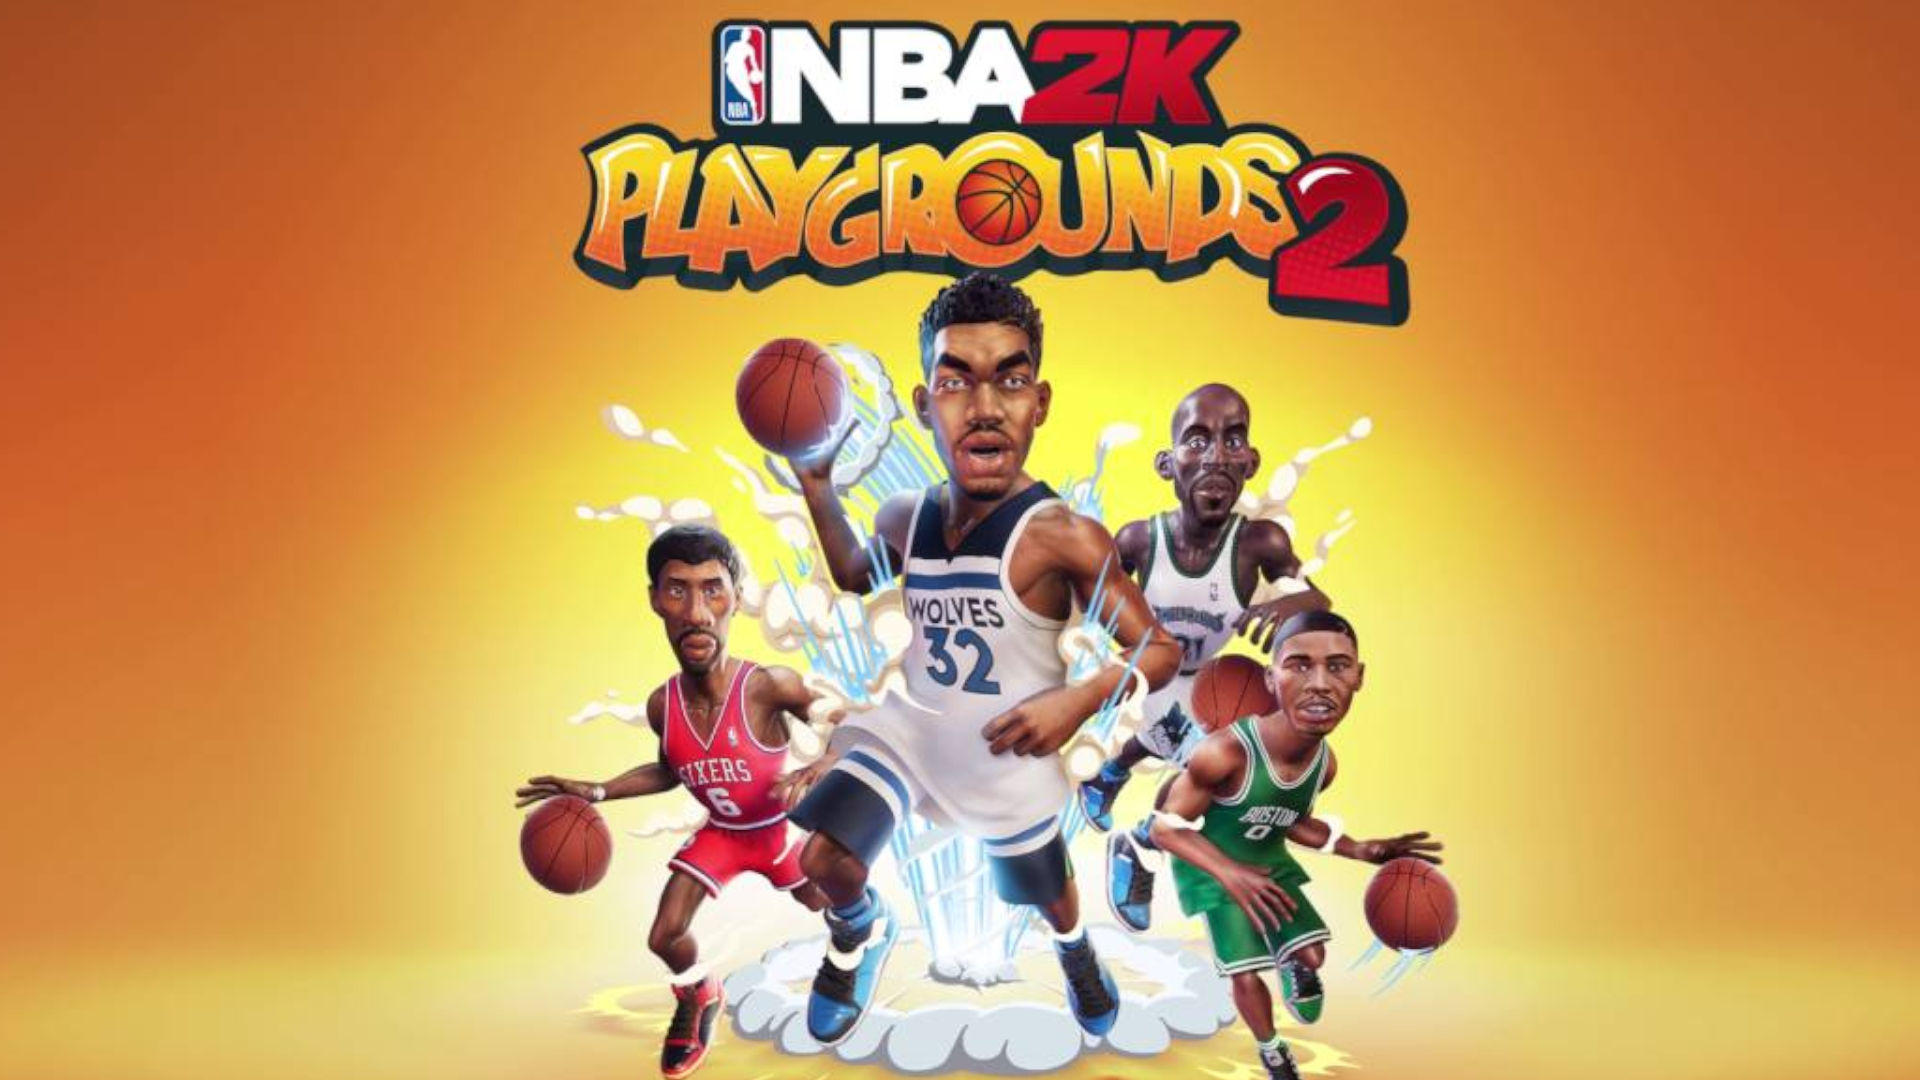 2 Player Basketball Games - Play the Best 2 Player Basketball Games Online